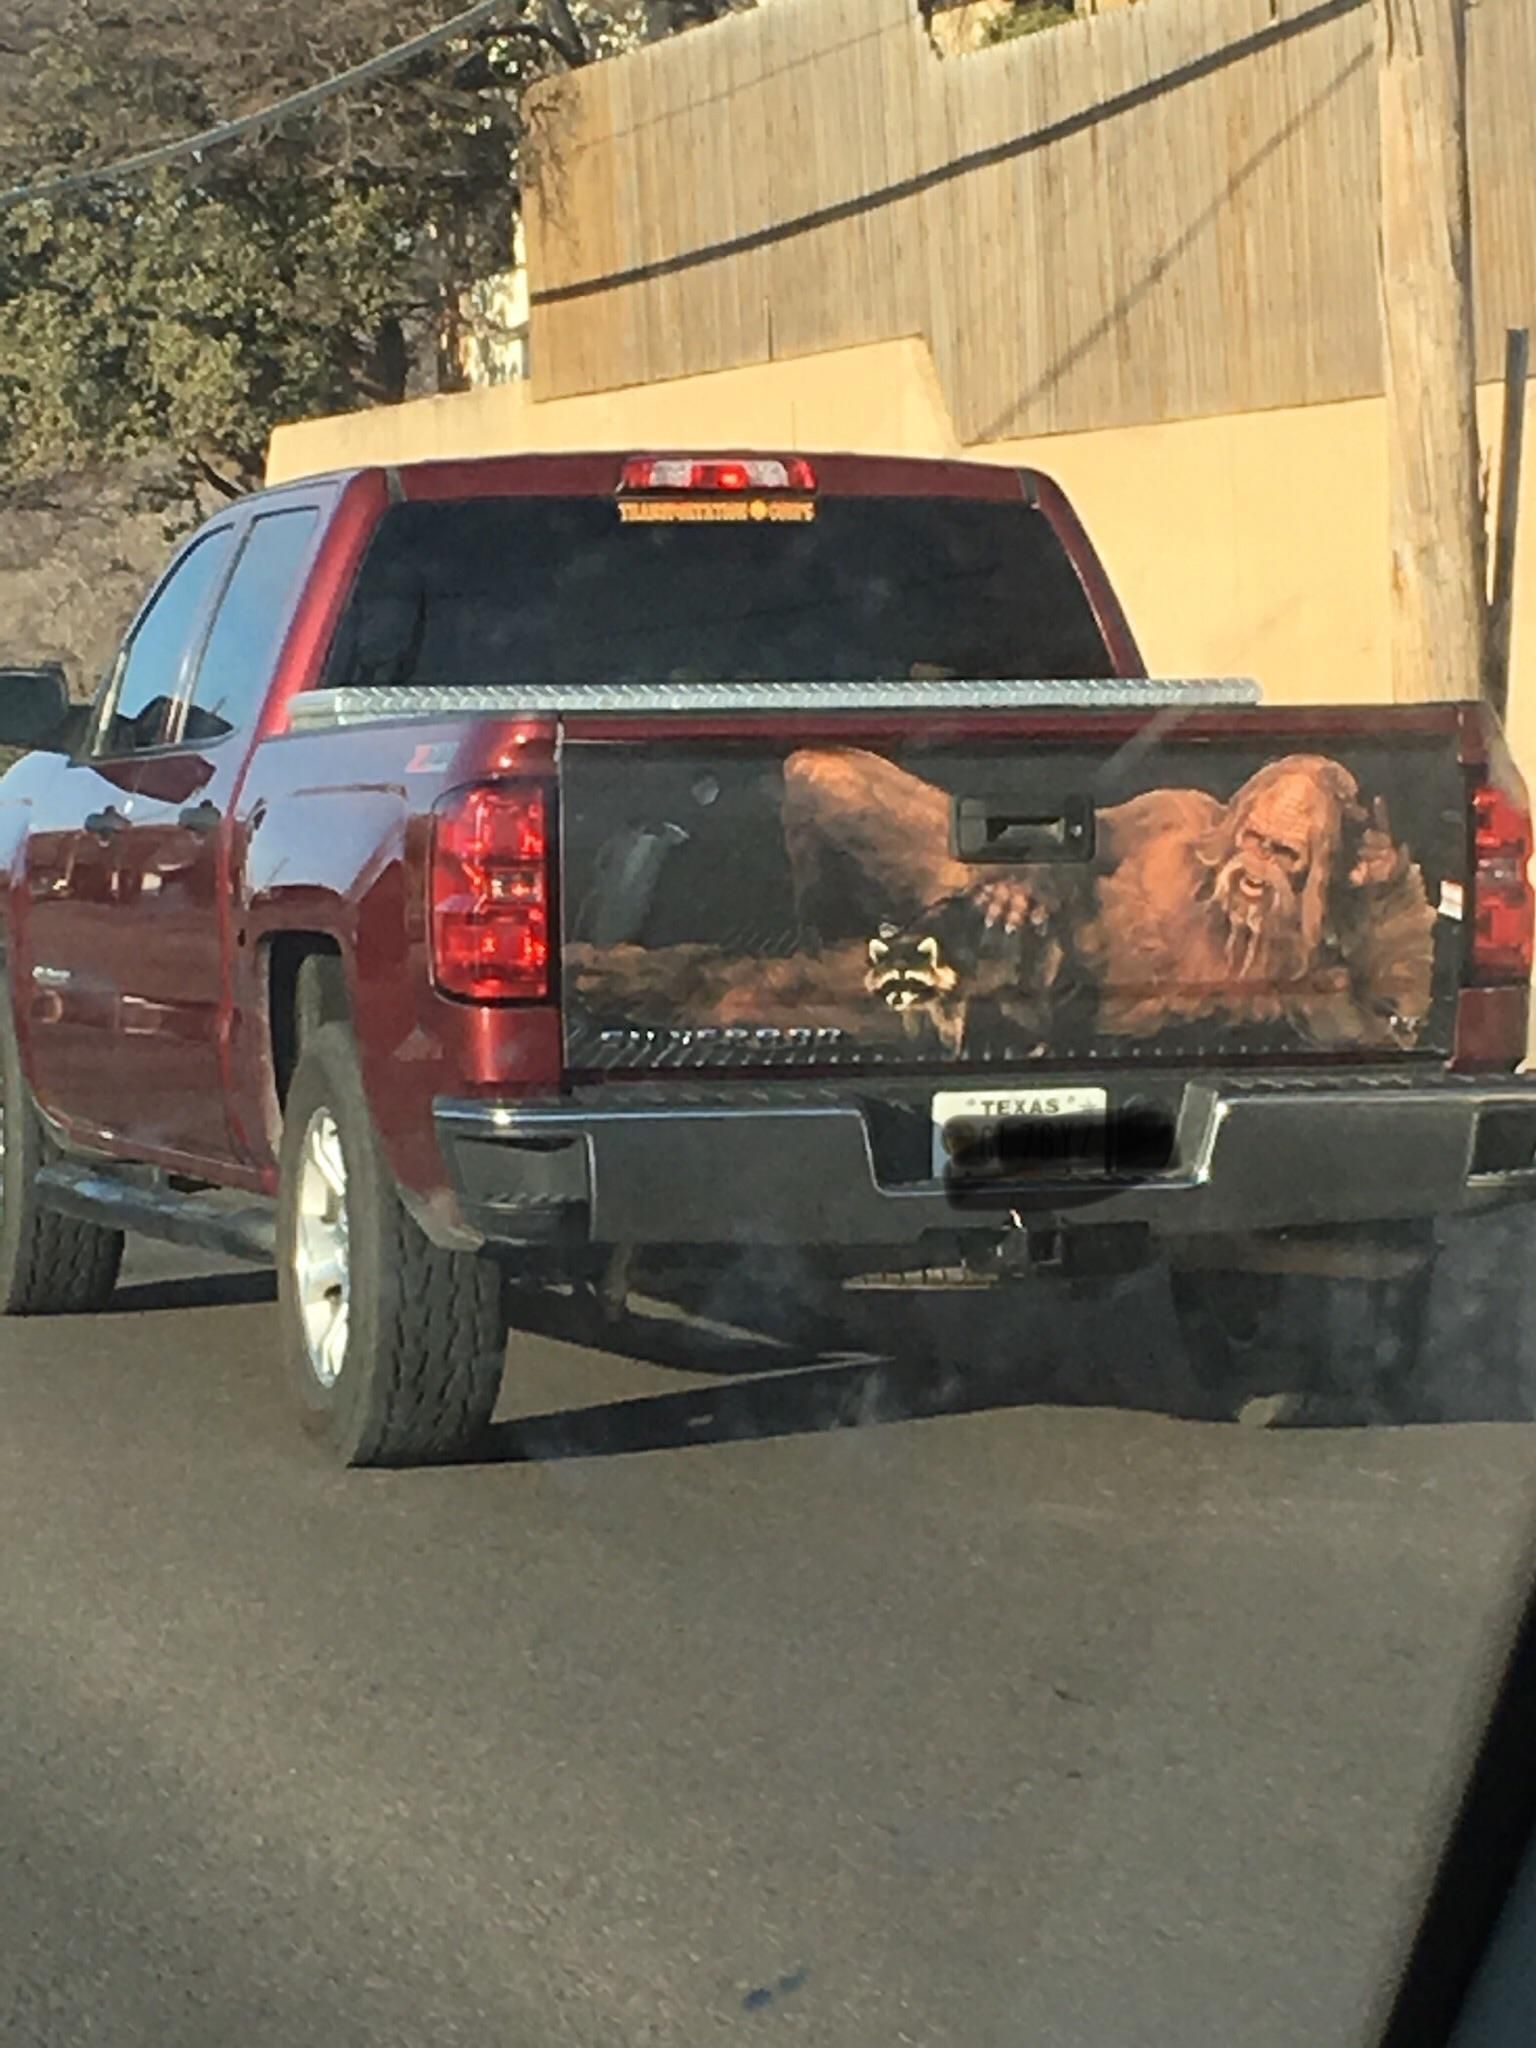 Sooo, this masterpiece can be seen driving around my hometown right now.